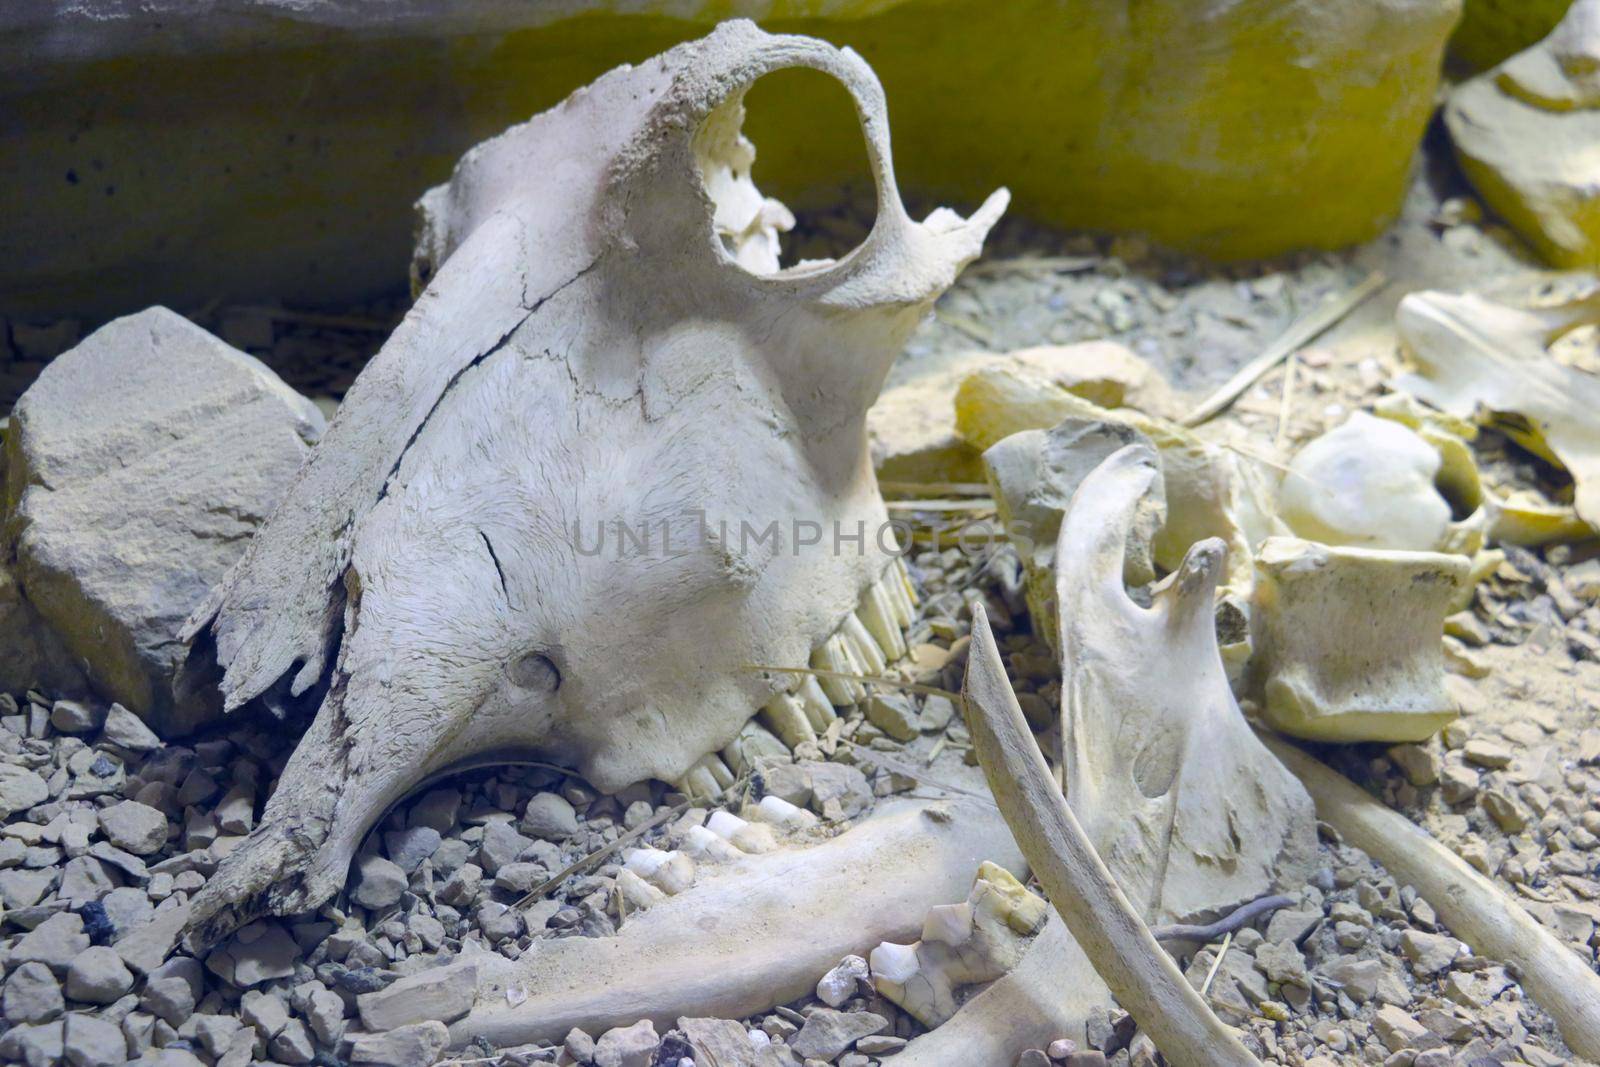 Skull and bones of a large animal. Remains after life